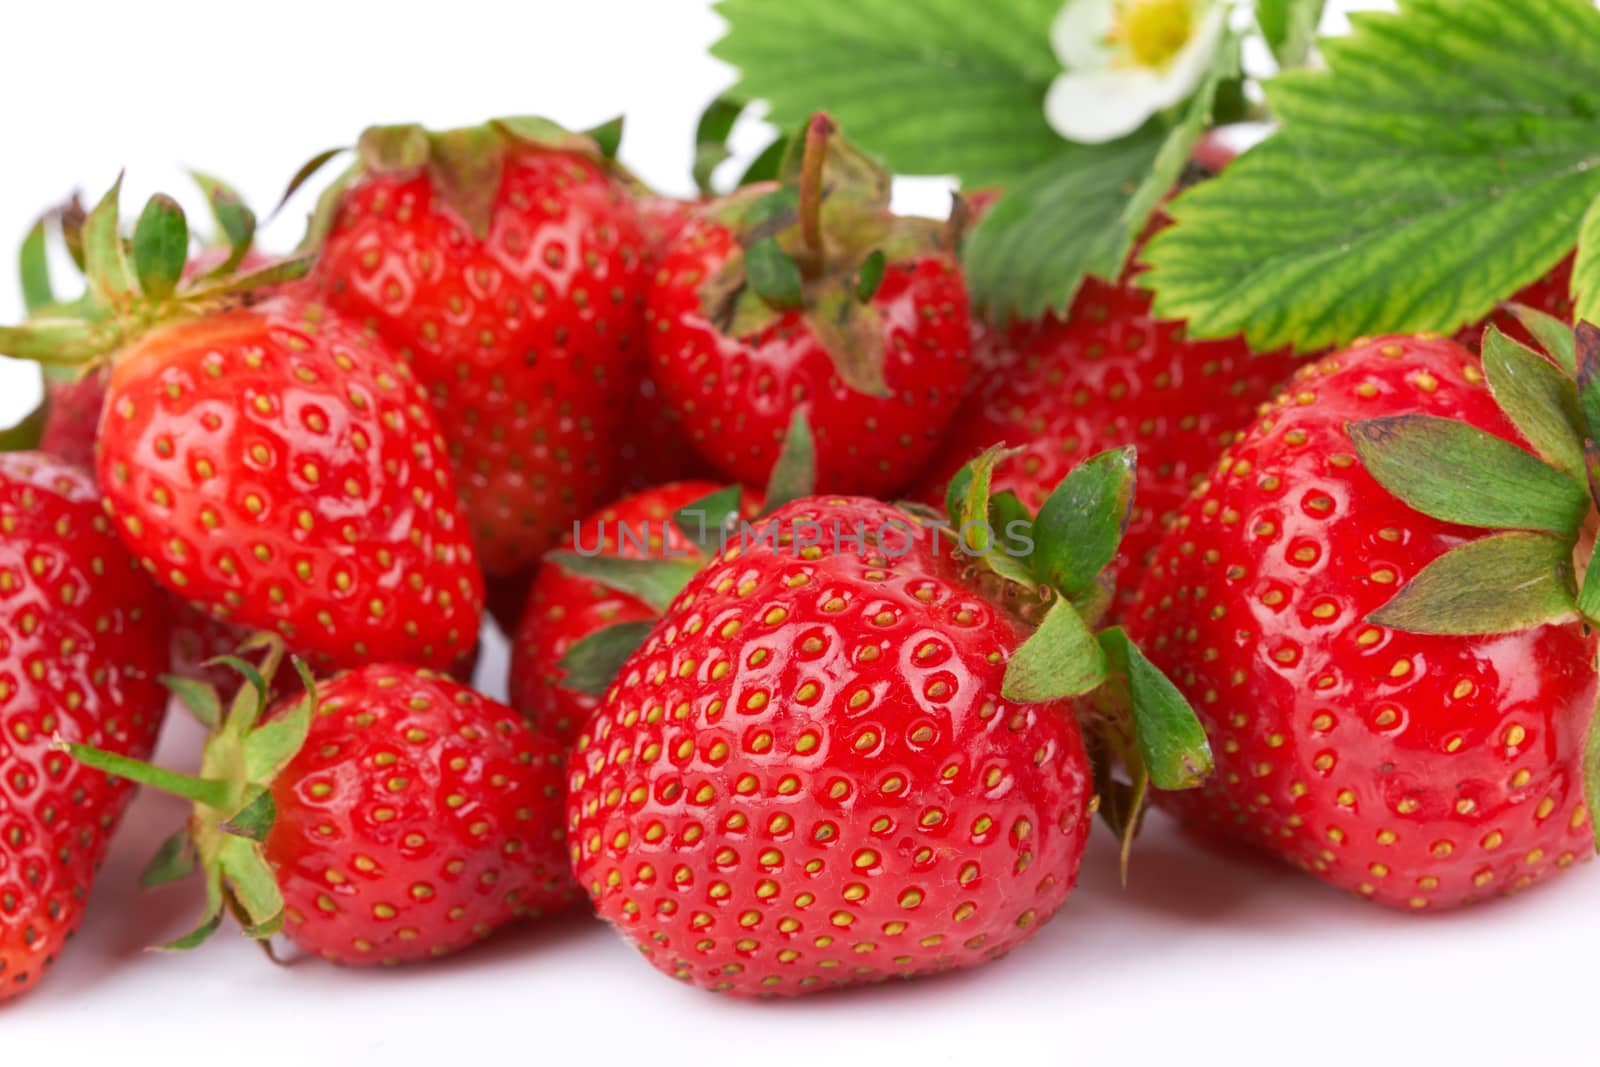 Strawberries with leaves and flower as a background